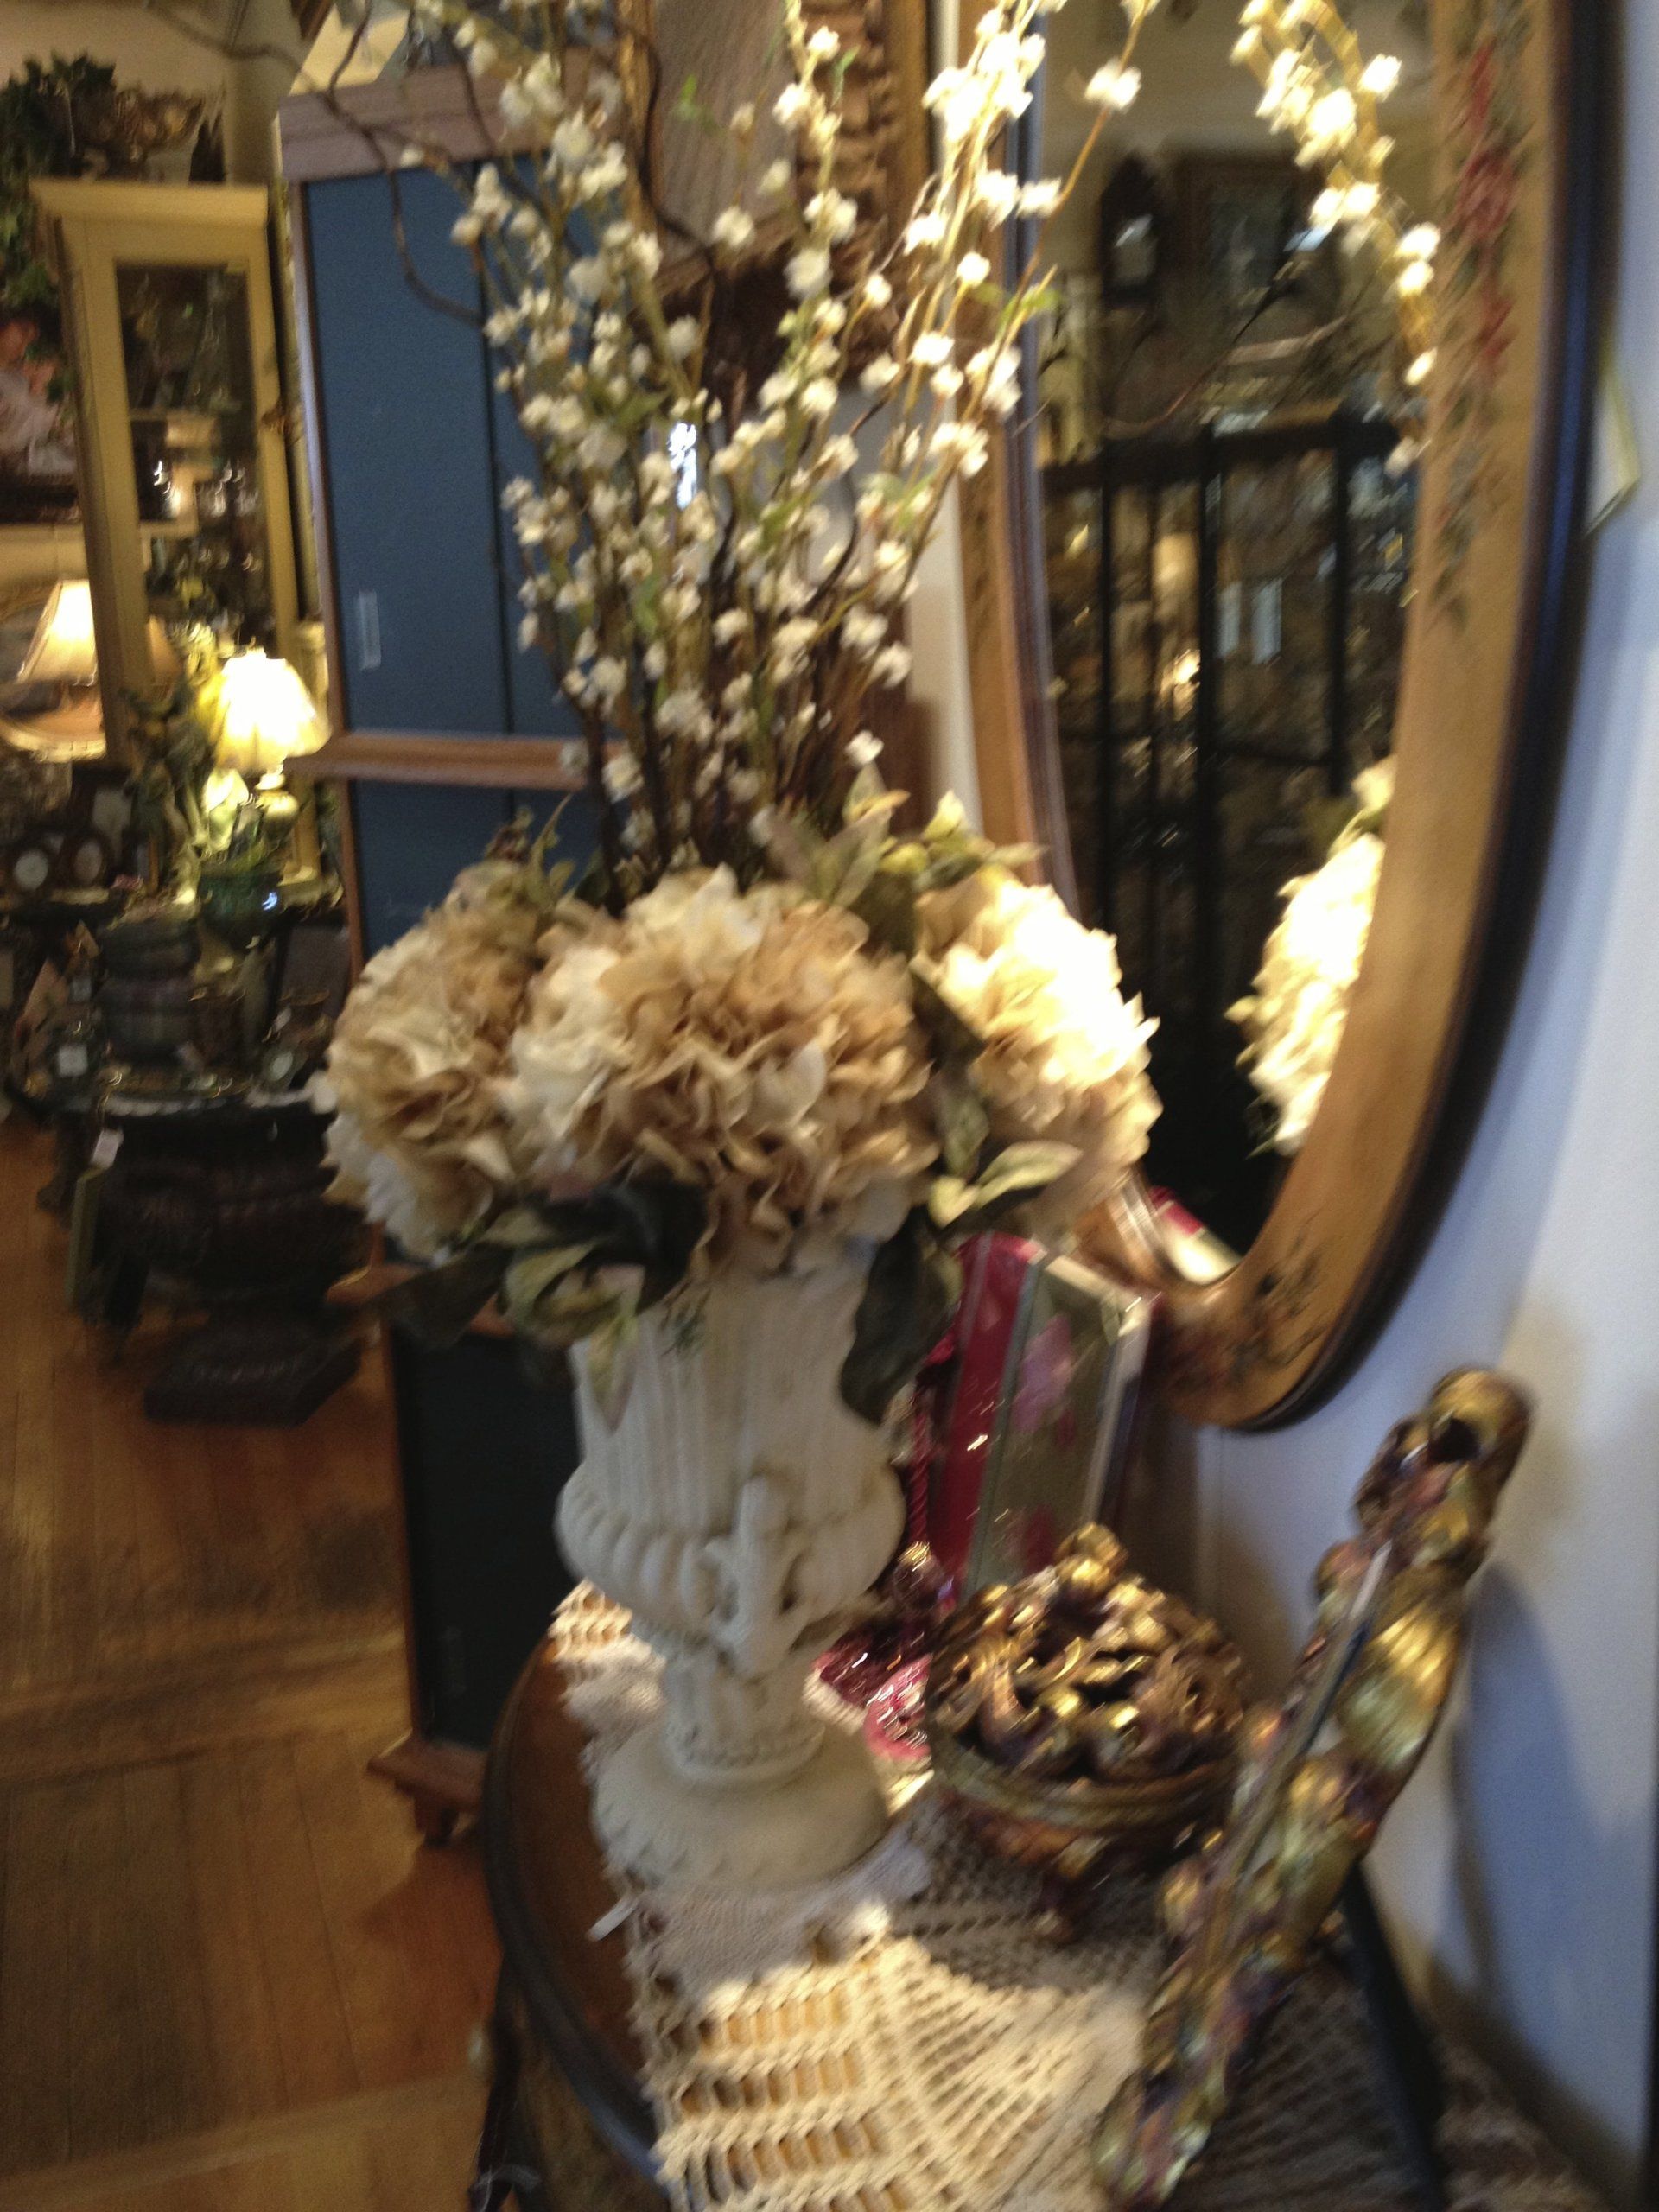 Cape House Gallery Custom Floral Designs